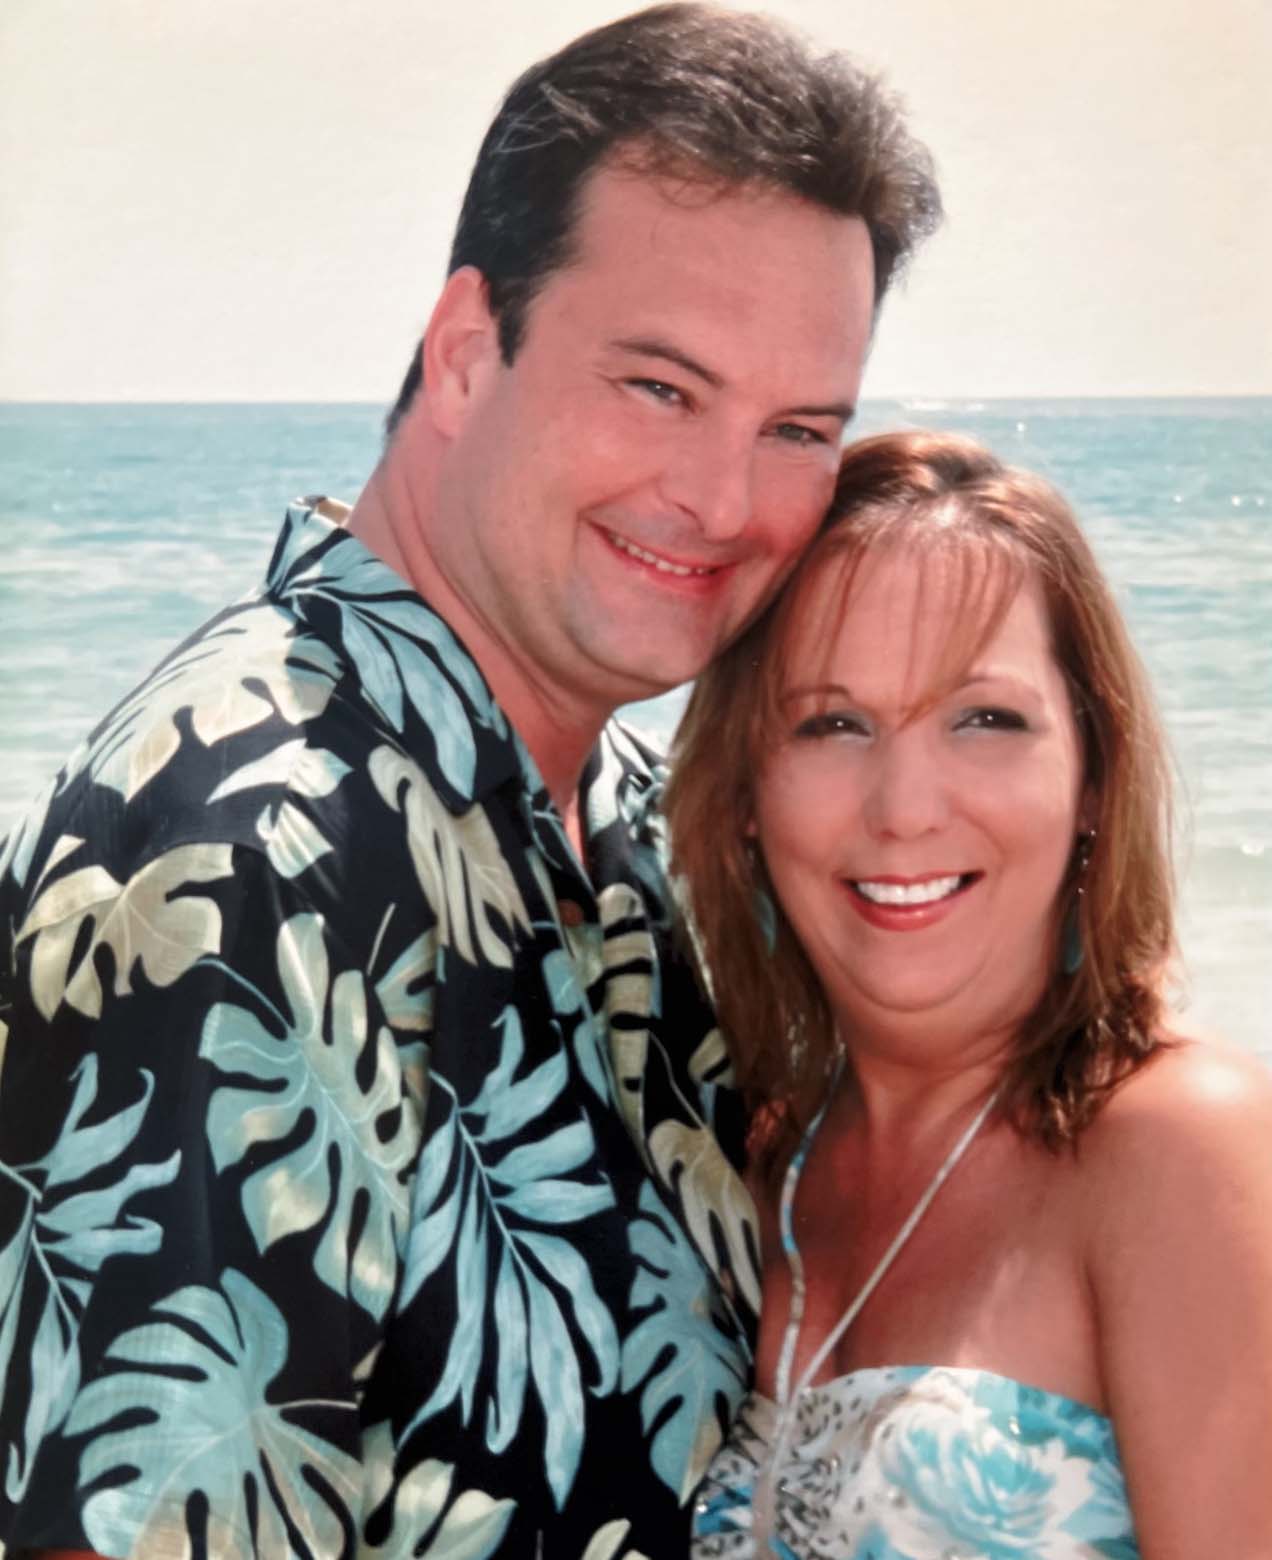 Michael Linton, Real Estate Broker Associate with RE/MAX Platinum Realty in Sarasota, and his beautiful wife Peggy Linton (circa 2005)